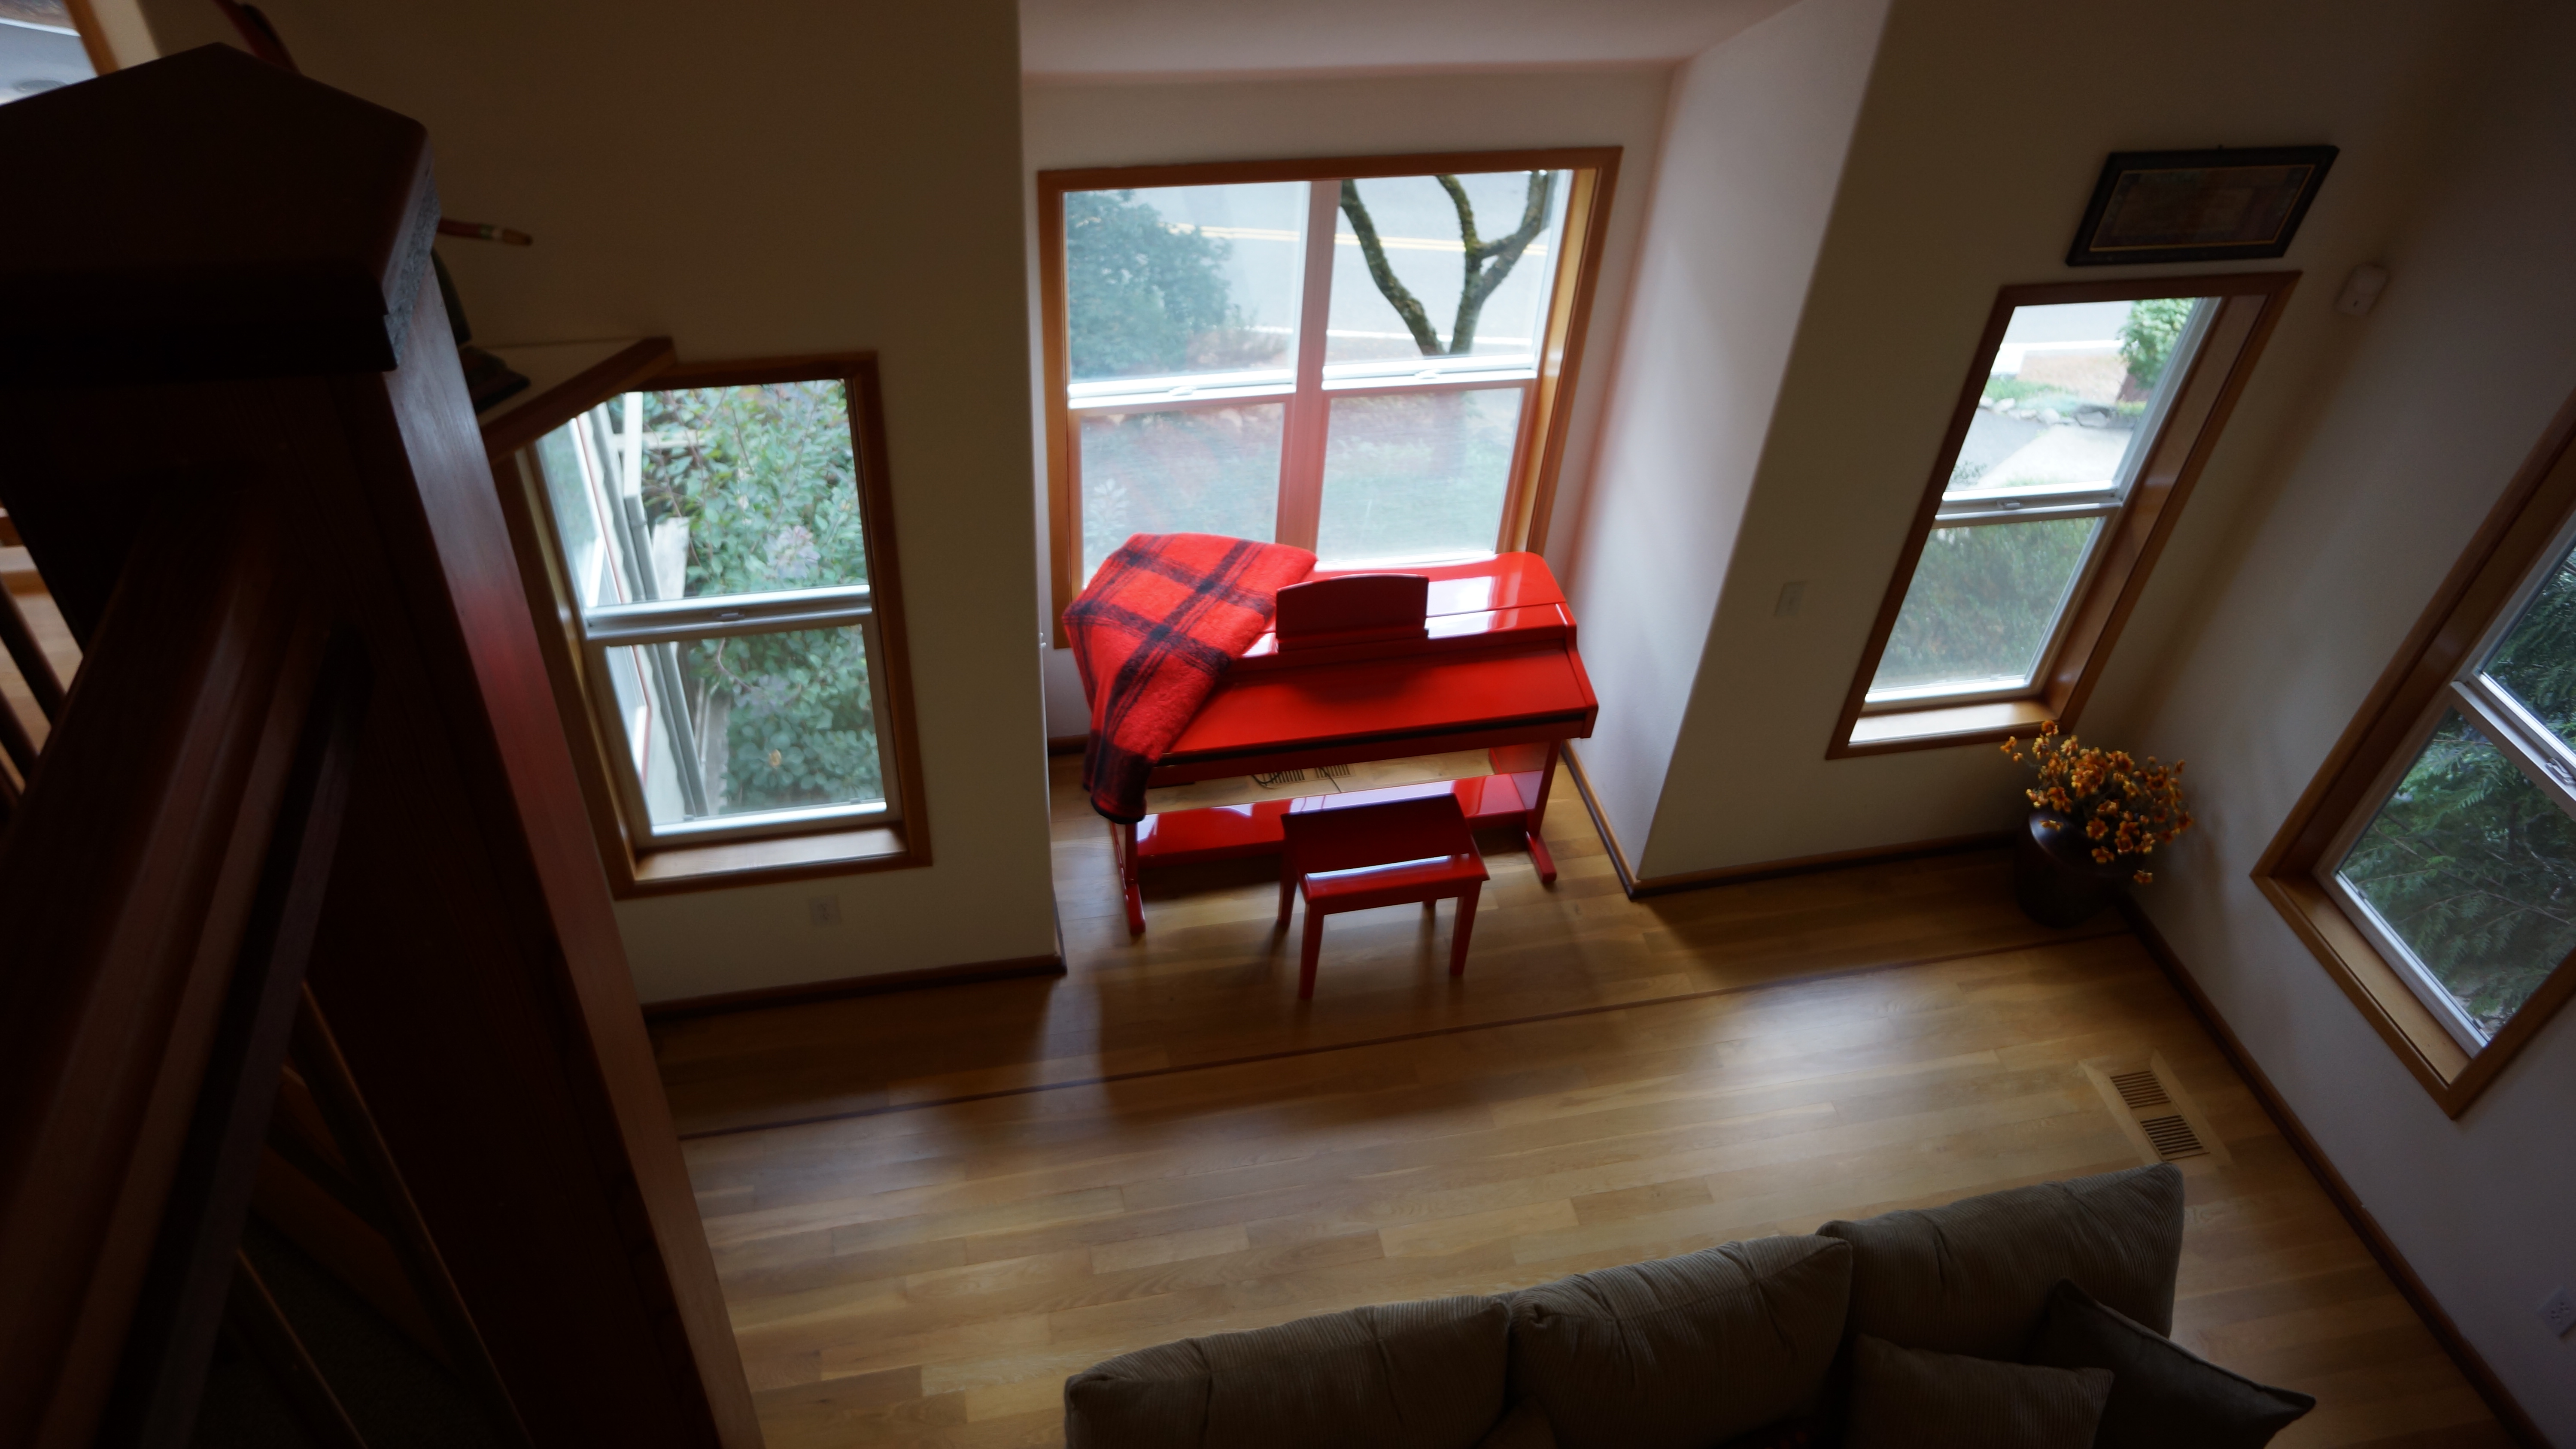 Your Piano has its own COVE. <BR>
Ask for the 'Red Piano' to be included in the purchase.